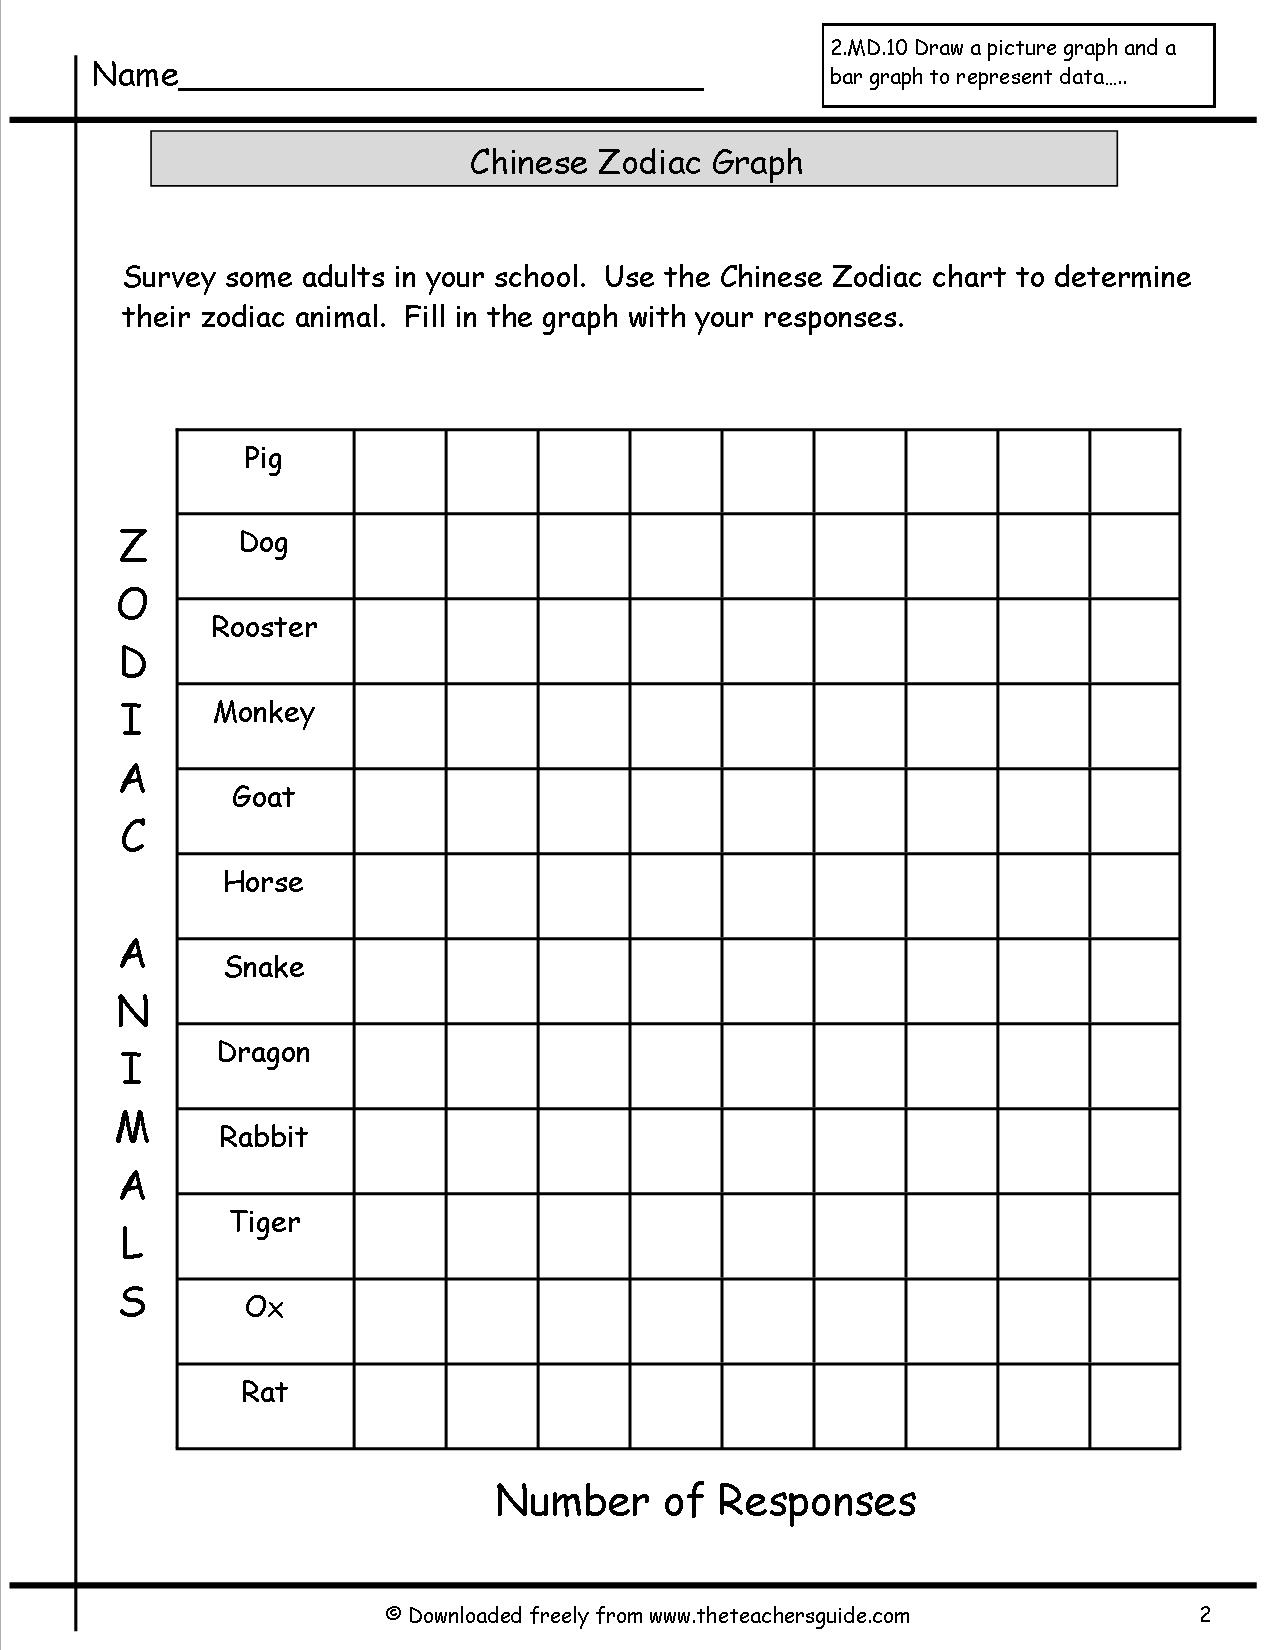 Reading And Creating Bar Graphs Worksheets From The Teacher's Guide